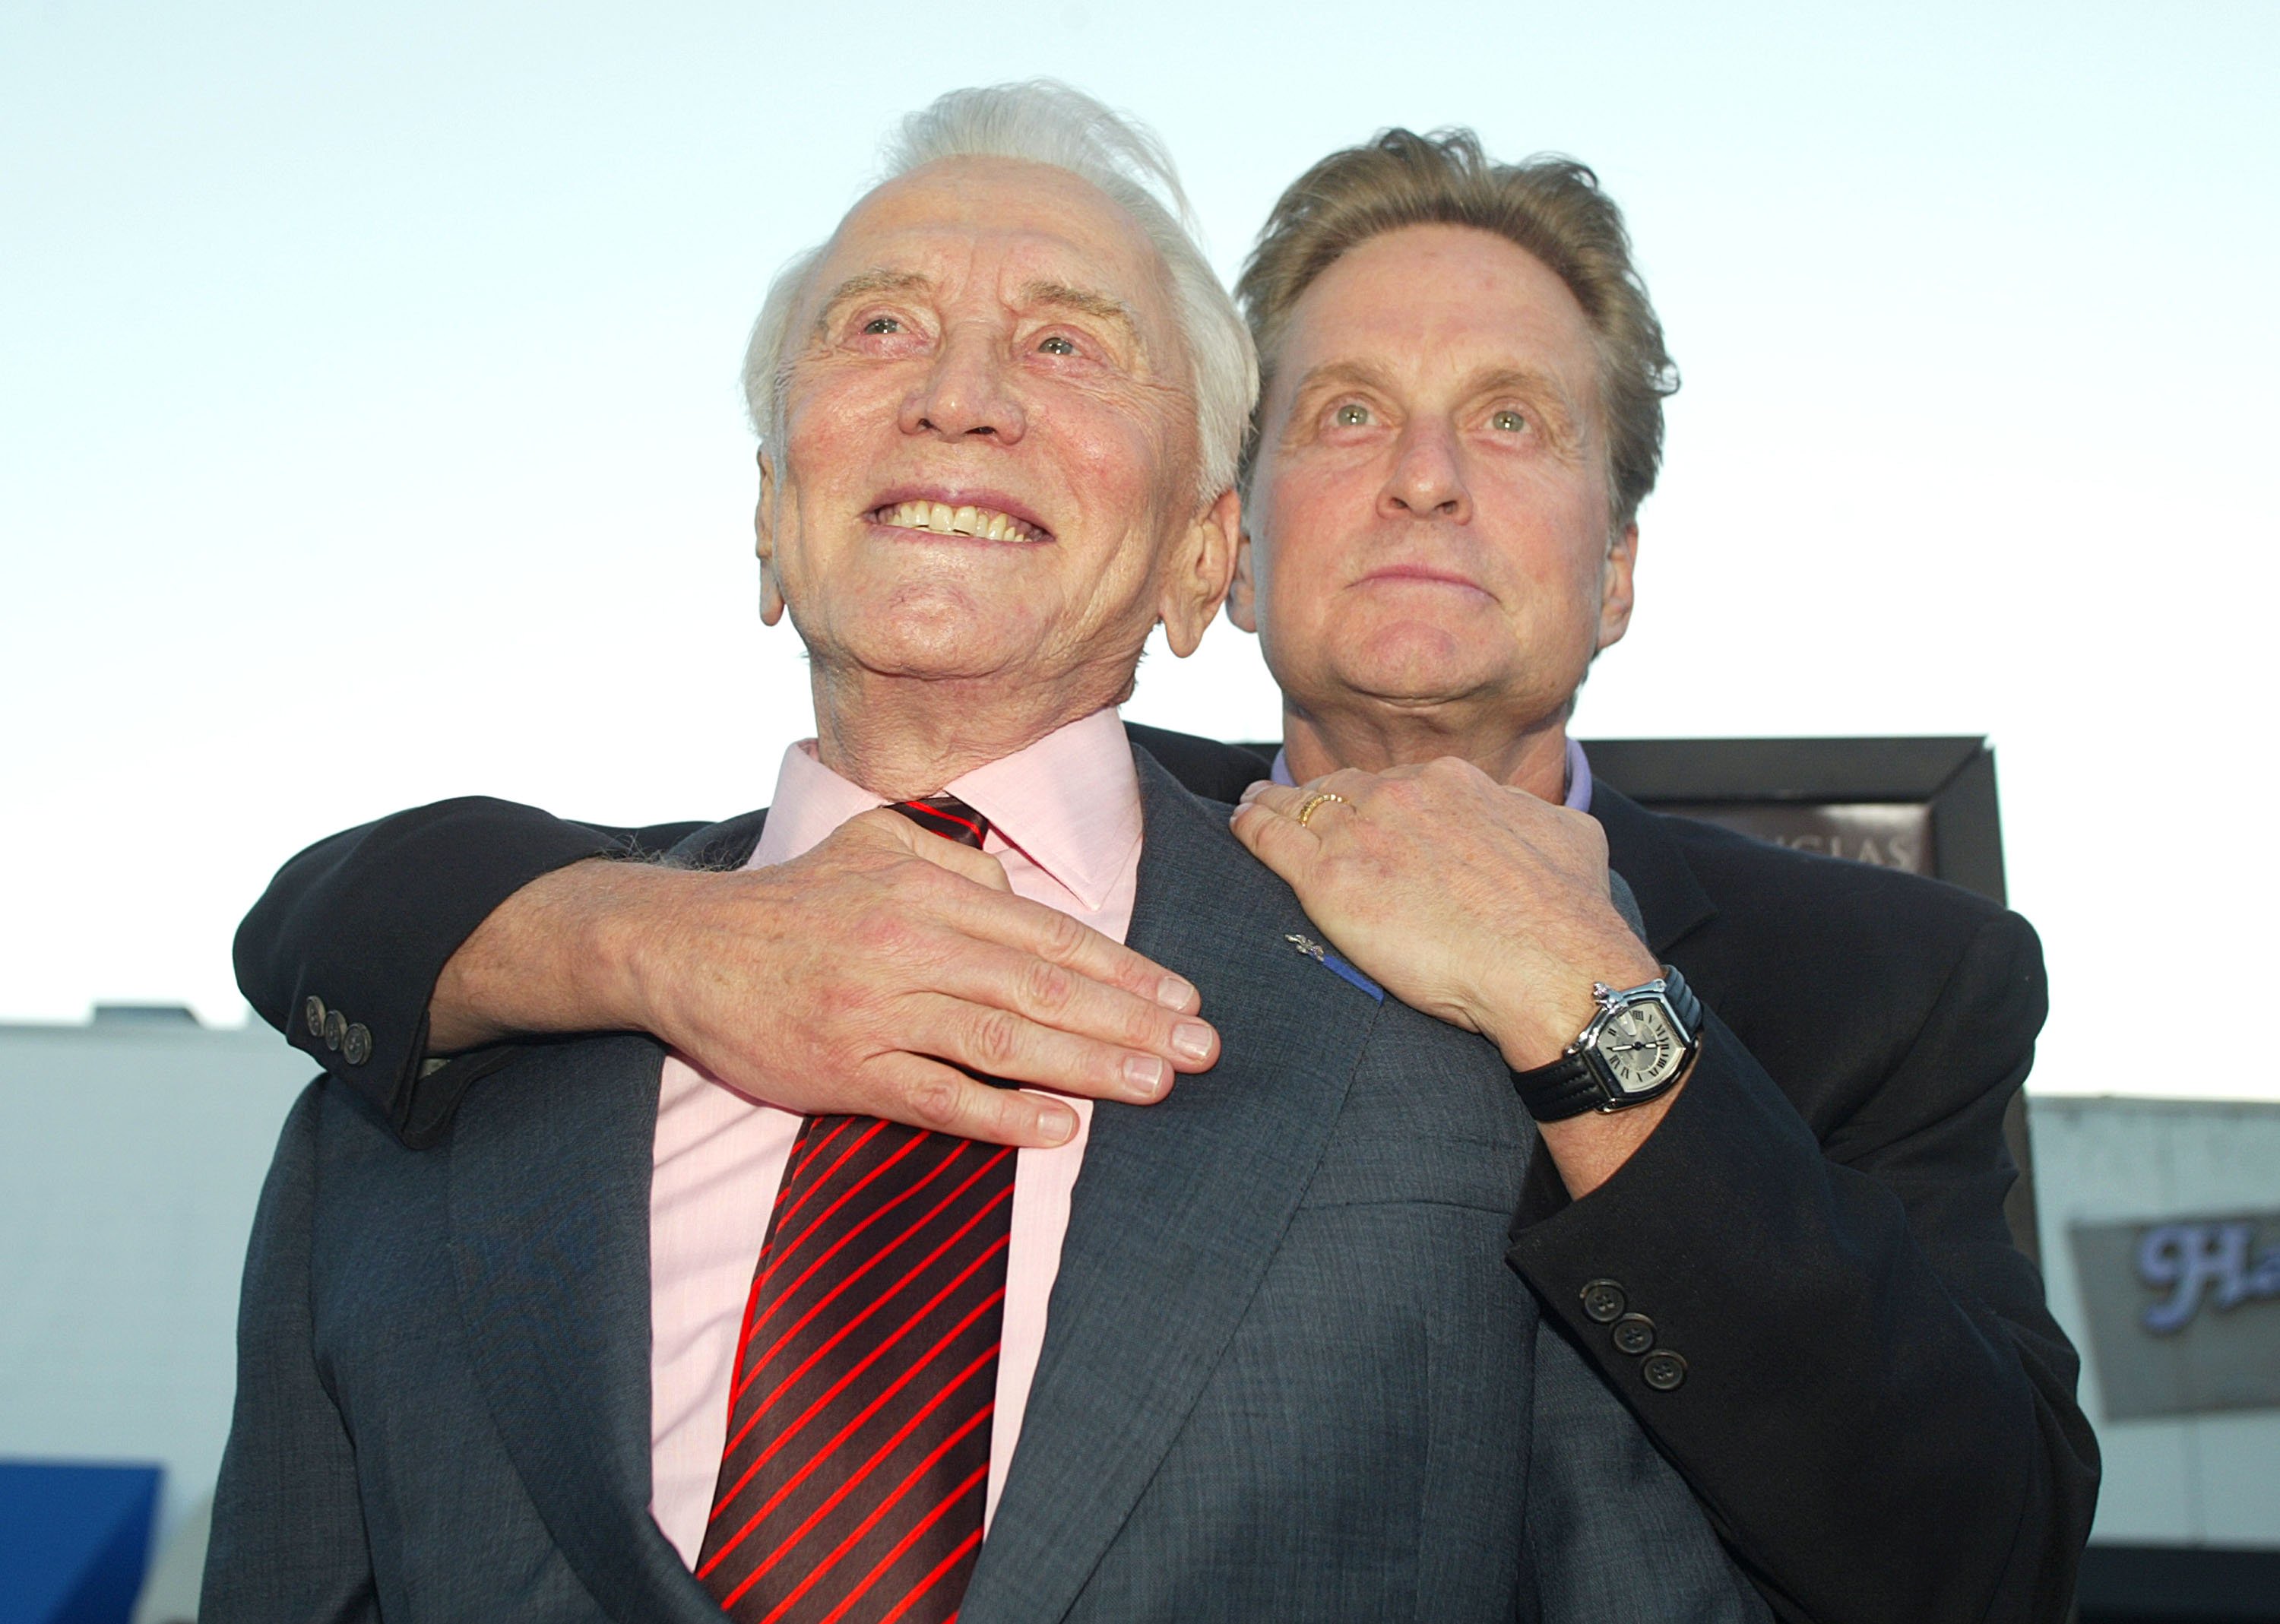 Kirk Douglas and son producer/actor Michael Douglas arrive at the premiere of "It Runs In The Family" at the Bruin Theater on April 7, 2003 | Source: Getty Images